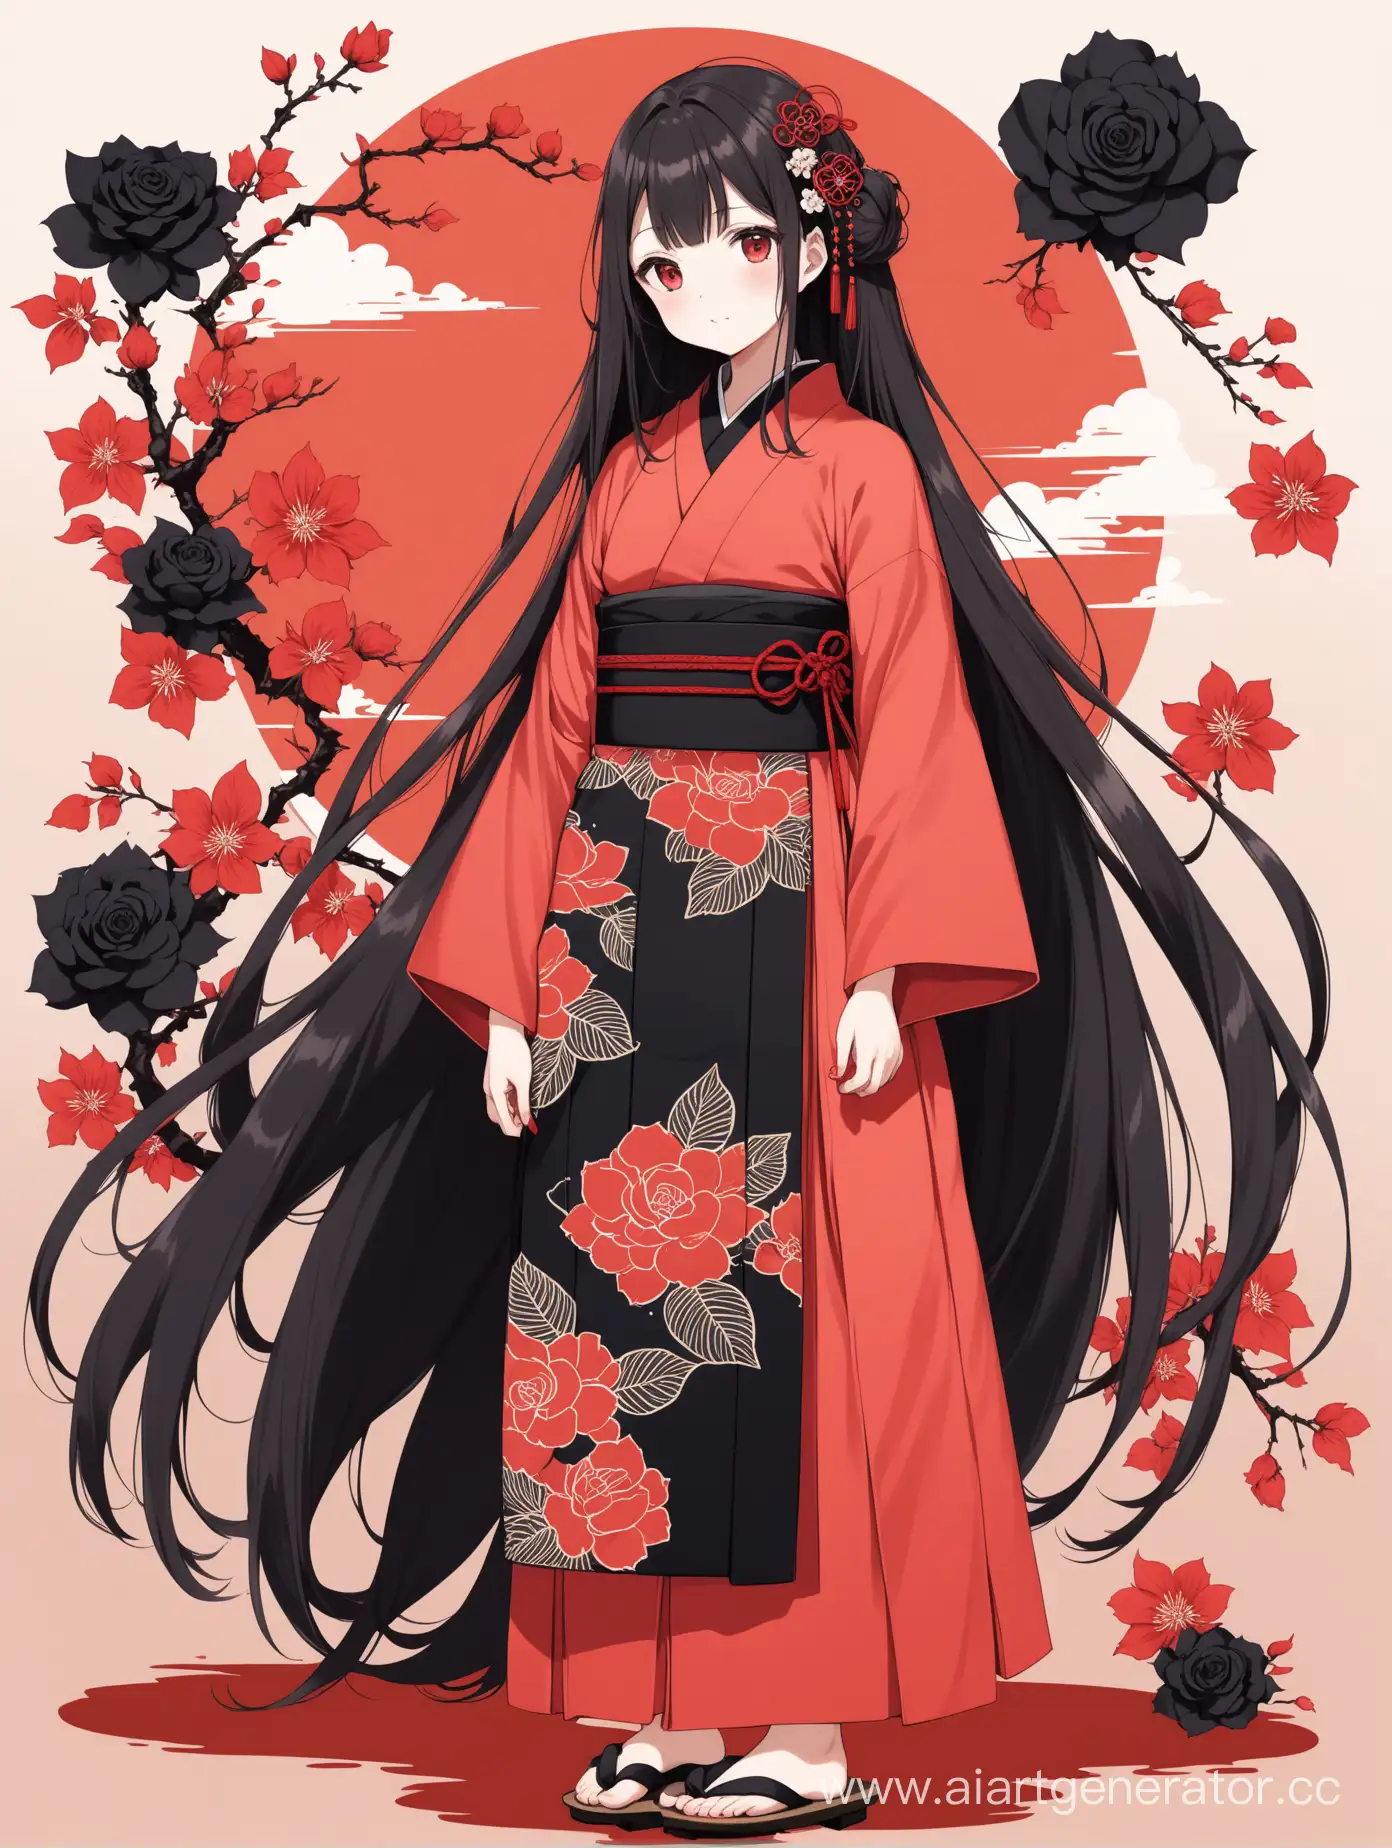 Tall-Girl-in-Red-Kimono-with-Black-Roses